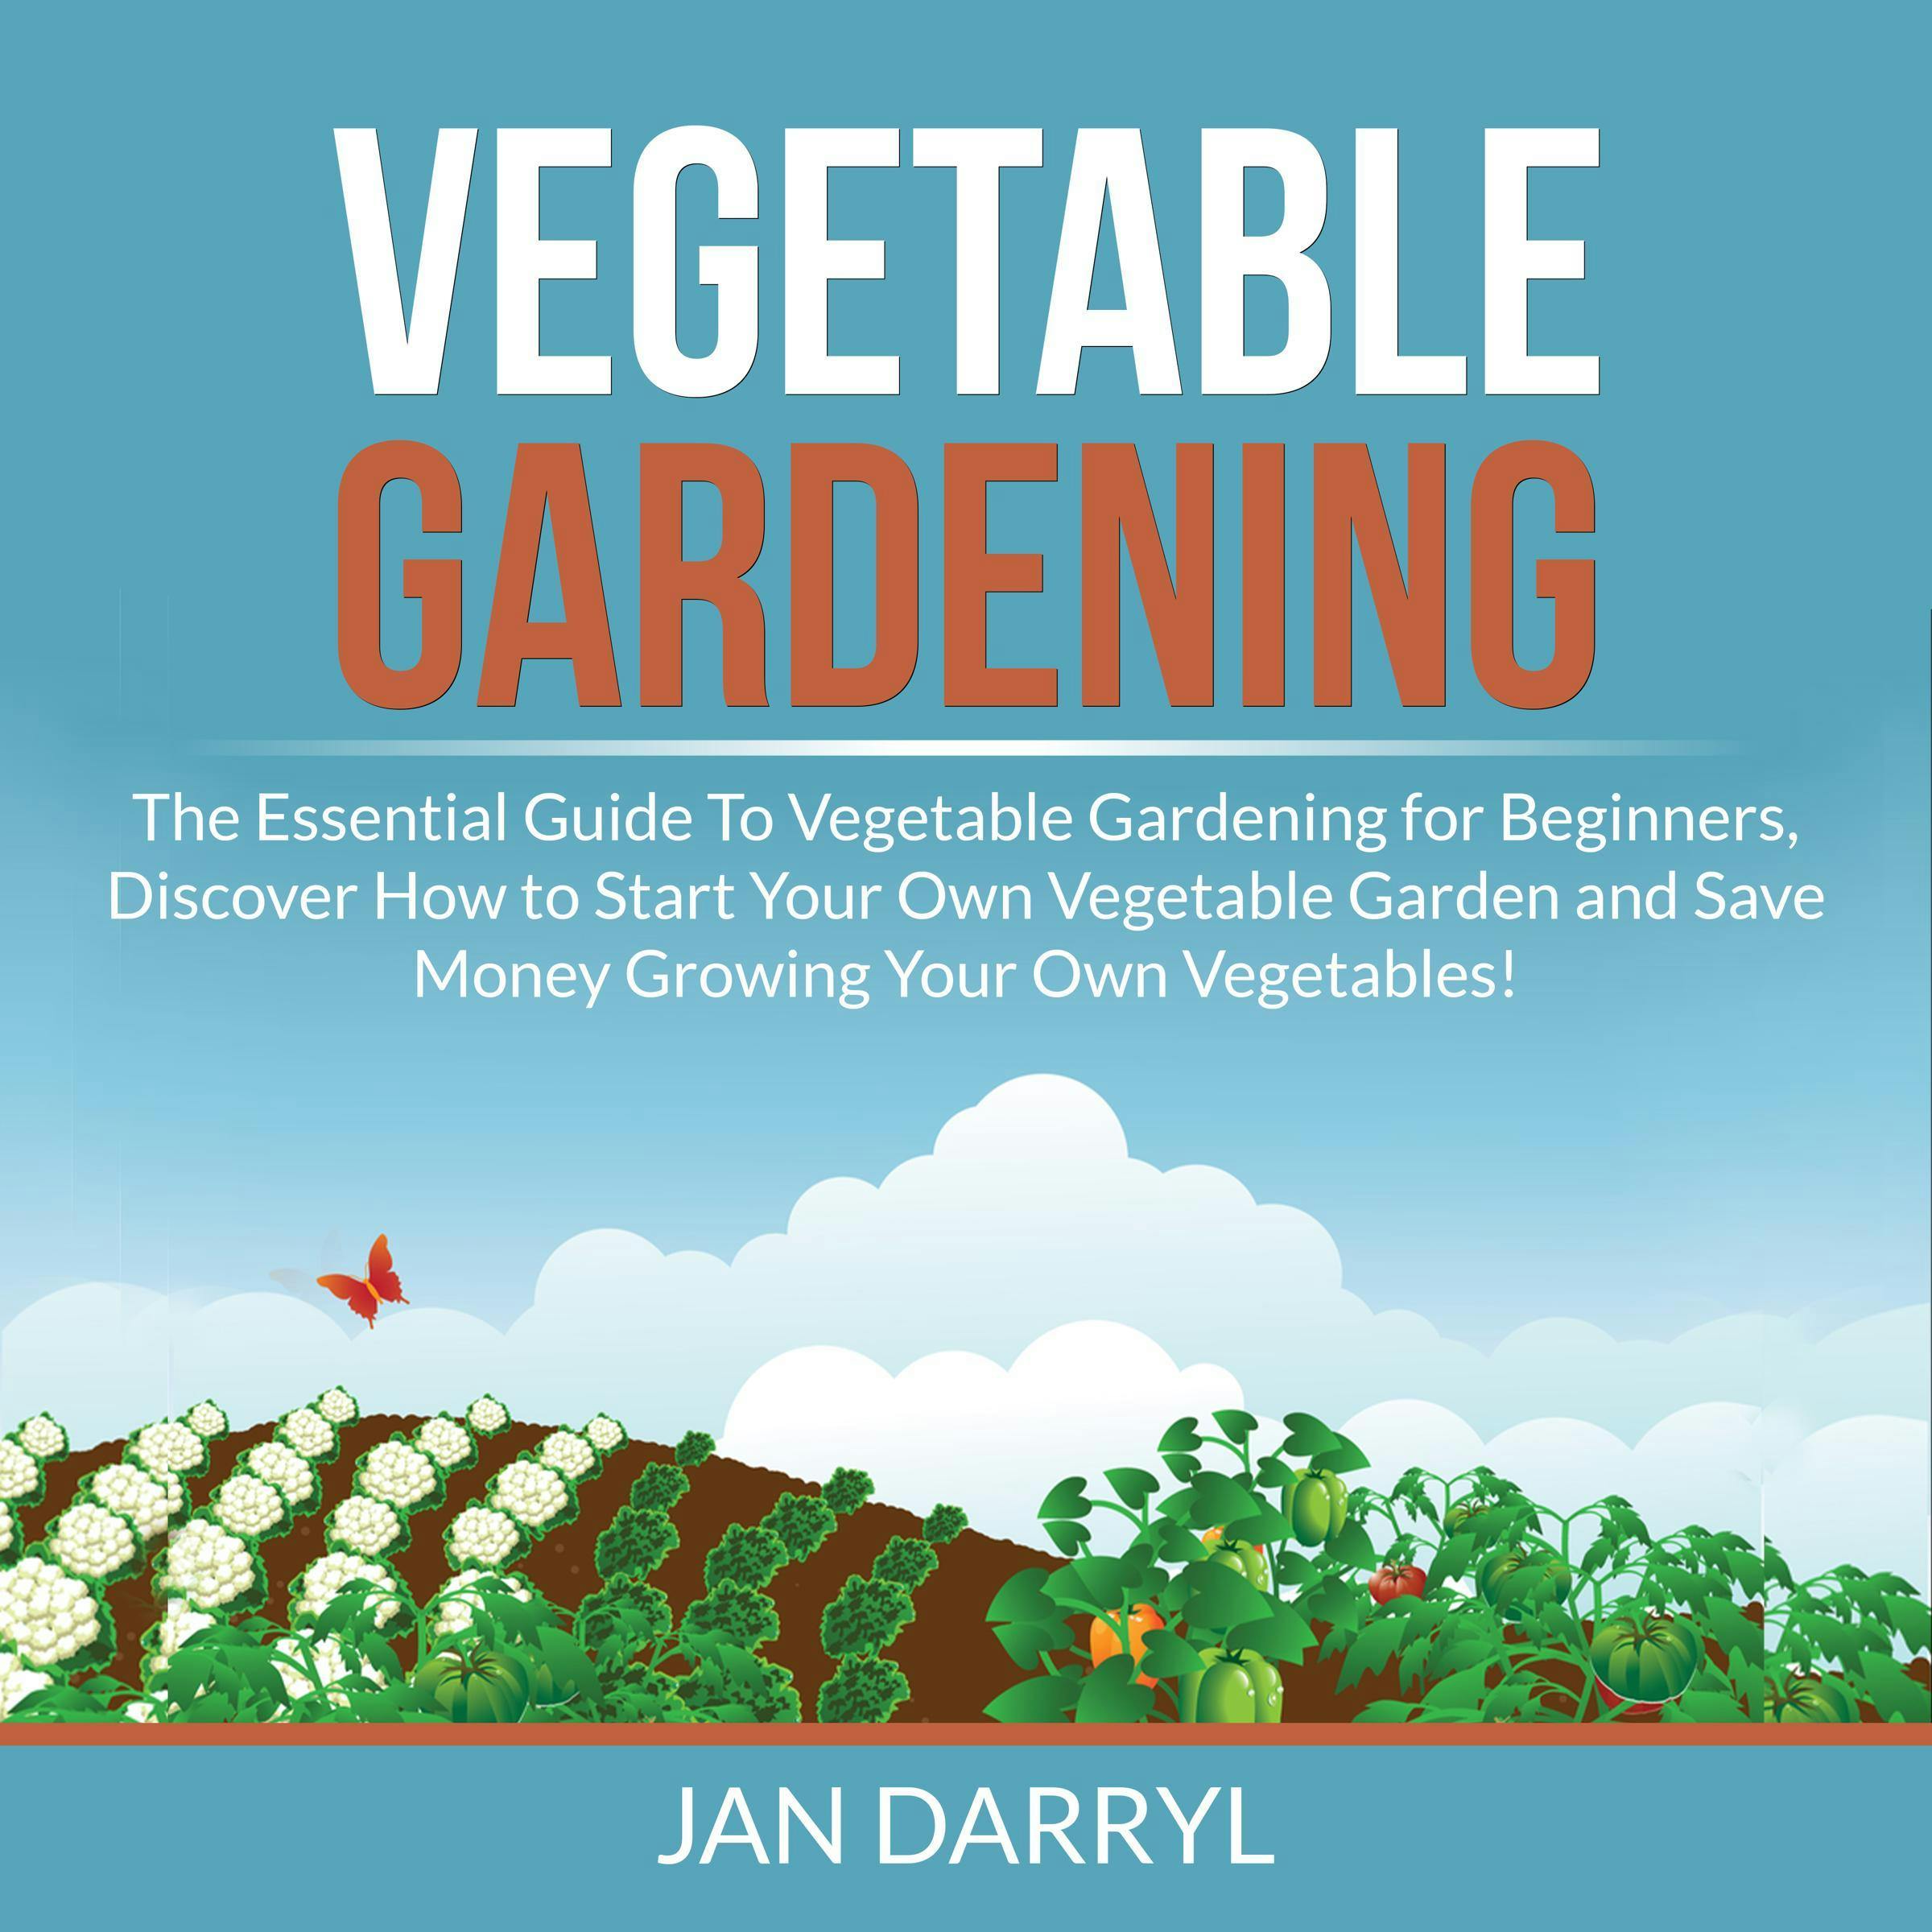 Vegetable Gardening: The Essential Guide To Vegetable Gardening for Beginners, Discover How to Start Your Own Vegetable Garden and Save Money Growing Your Own Vegetables! - Jan Darryl